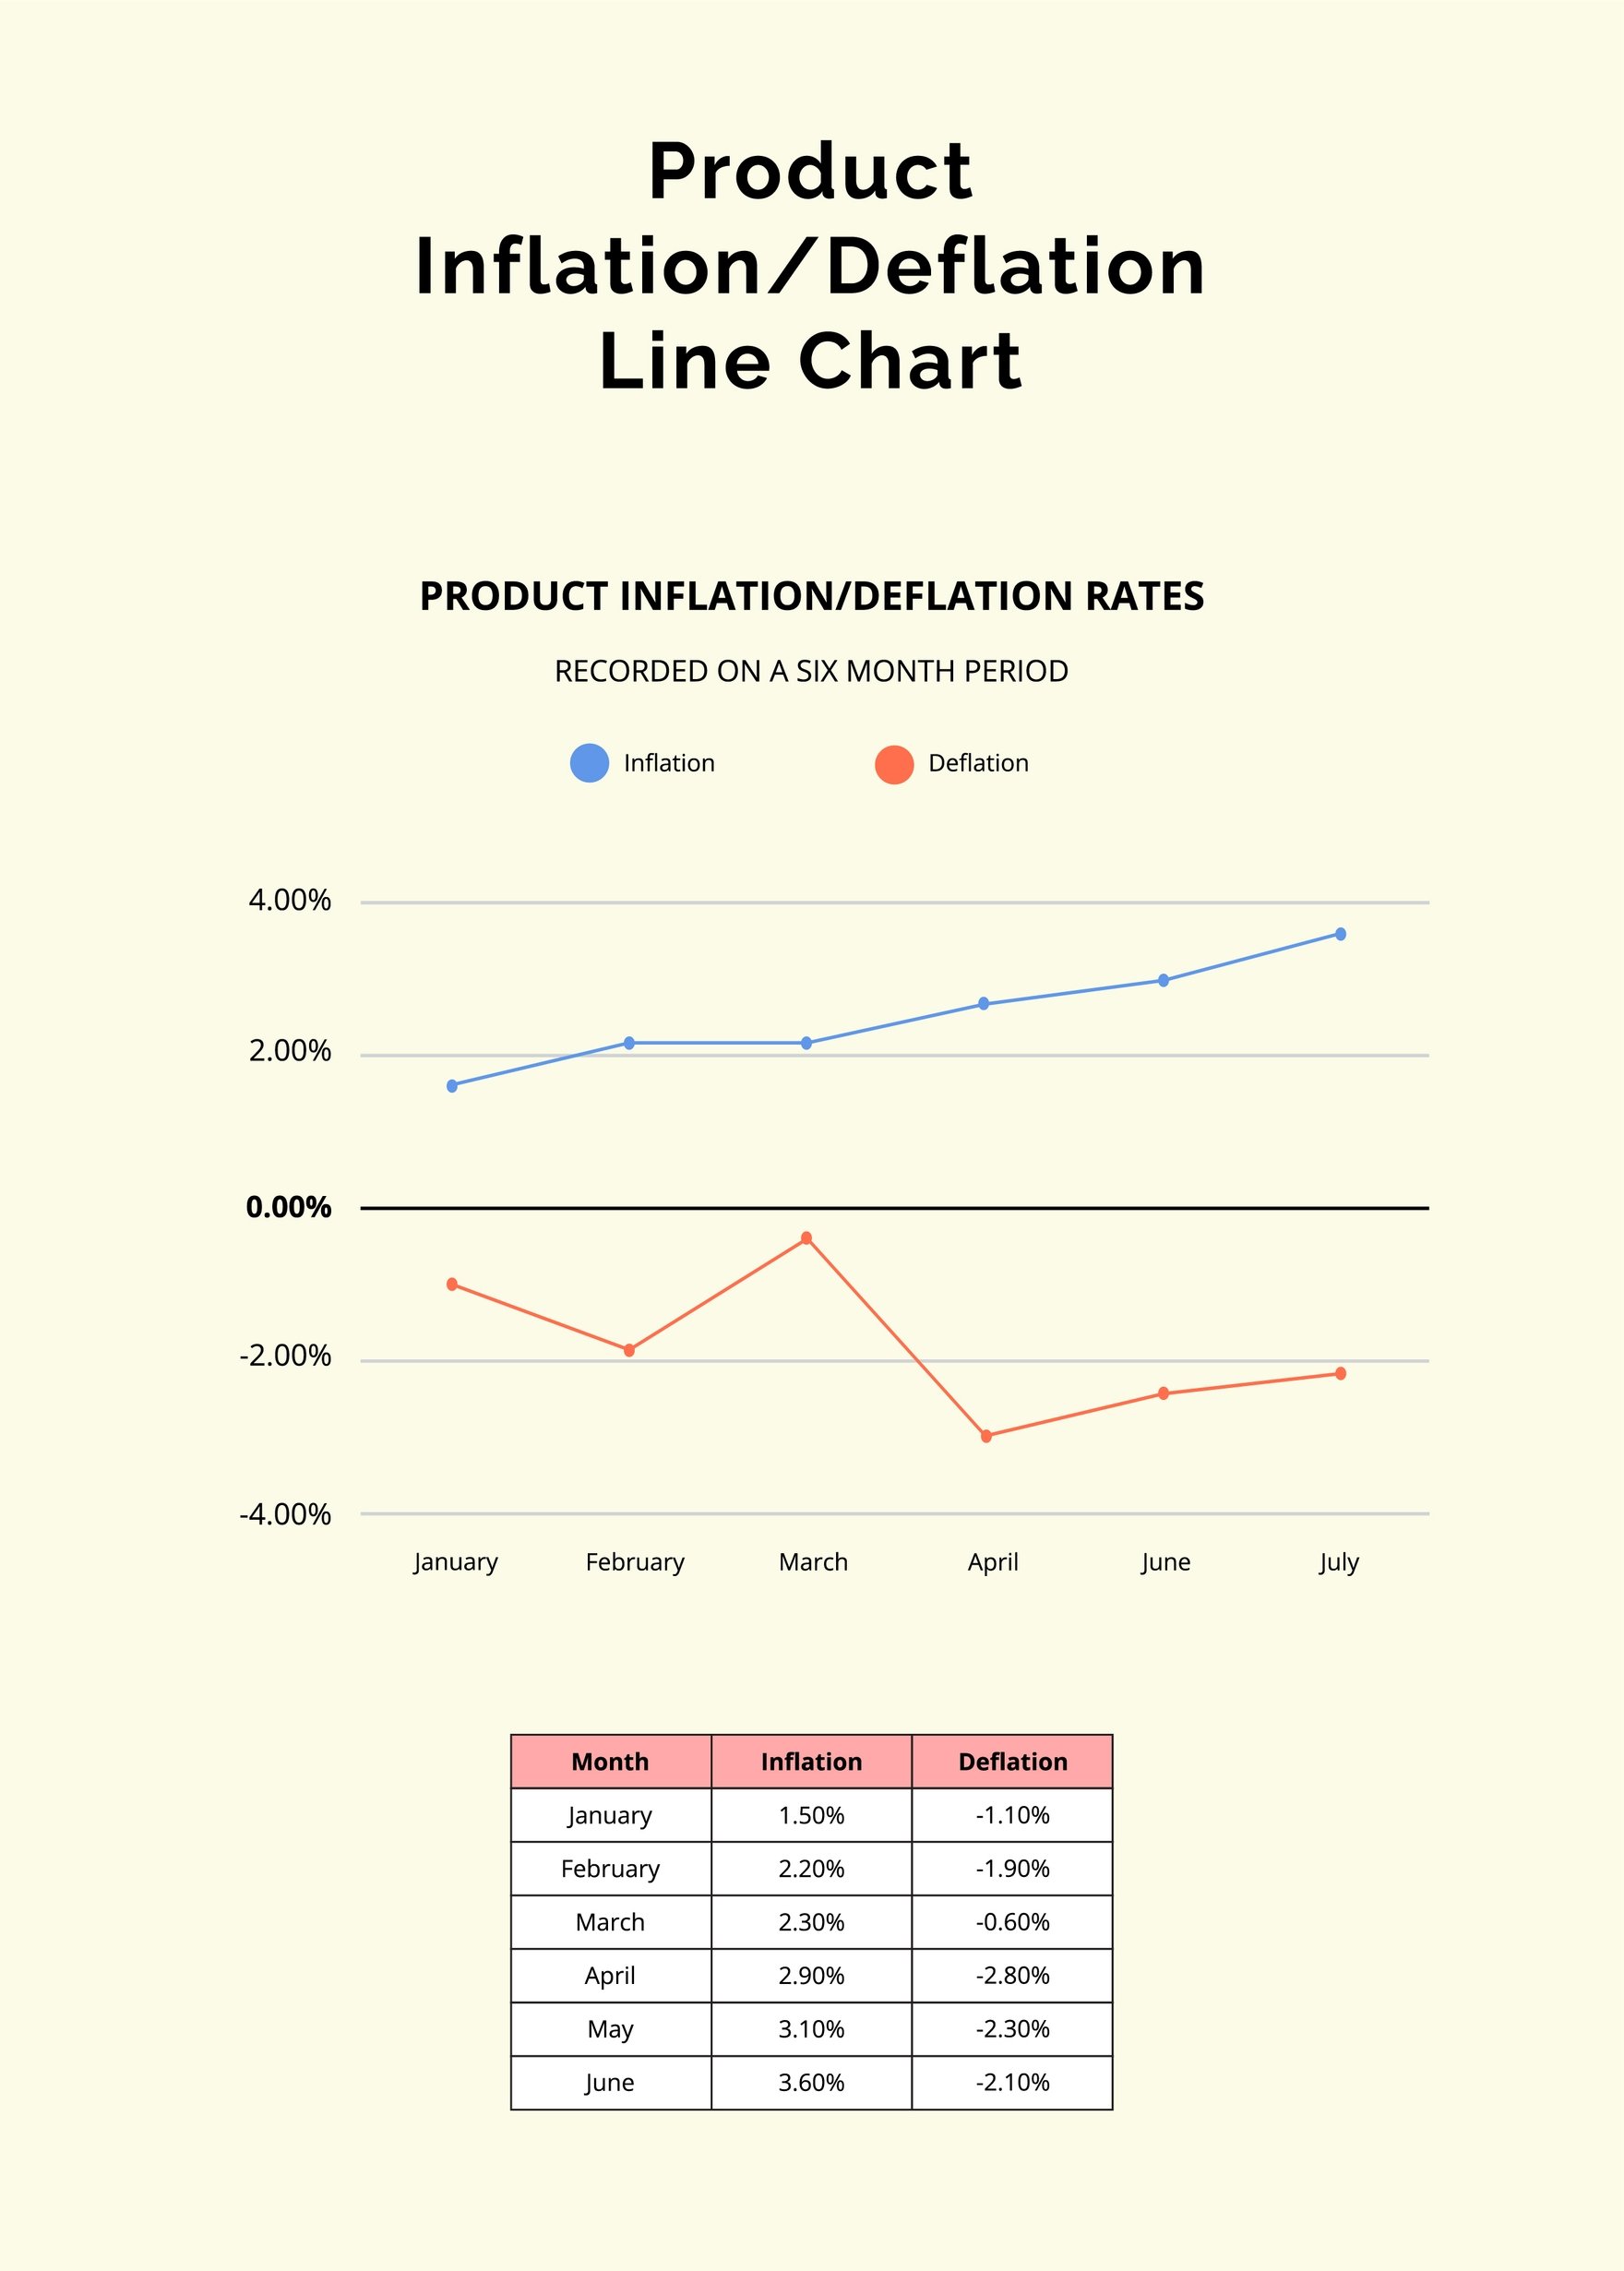 Free Product Inflation/Deflation Line Chart in PDF, Illustrator